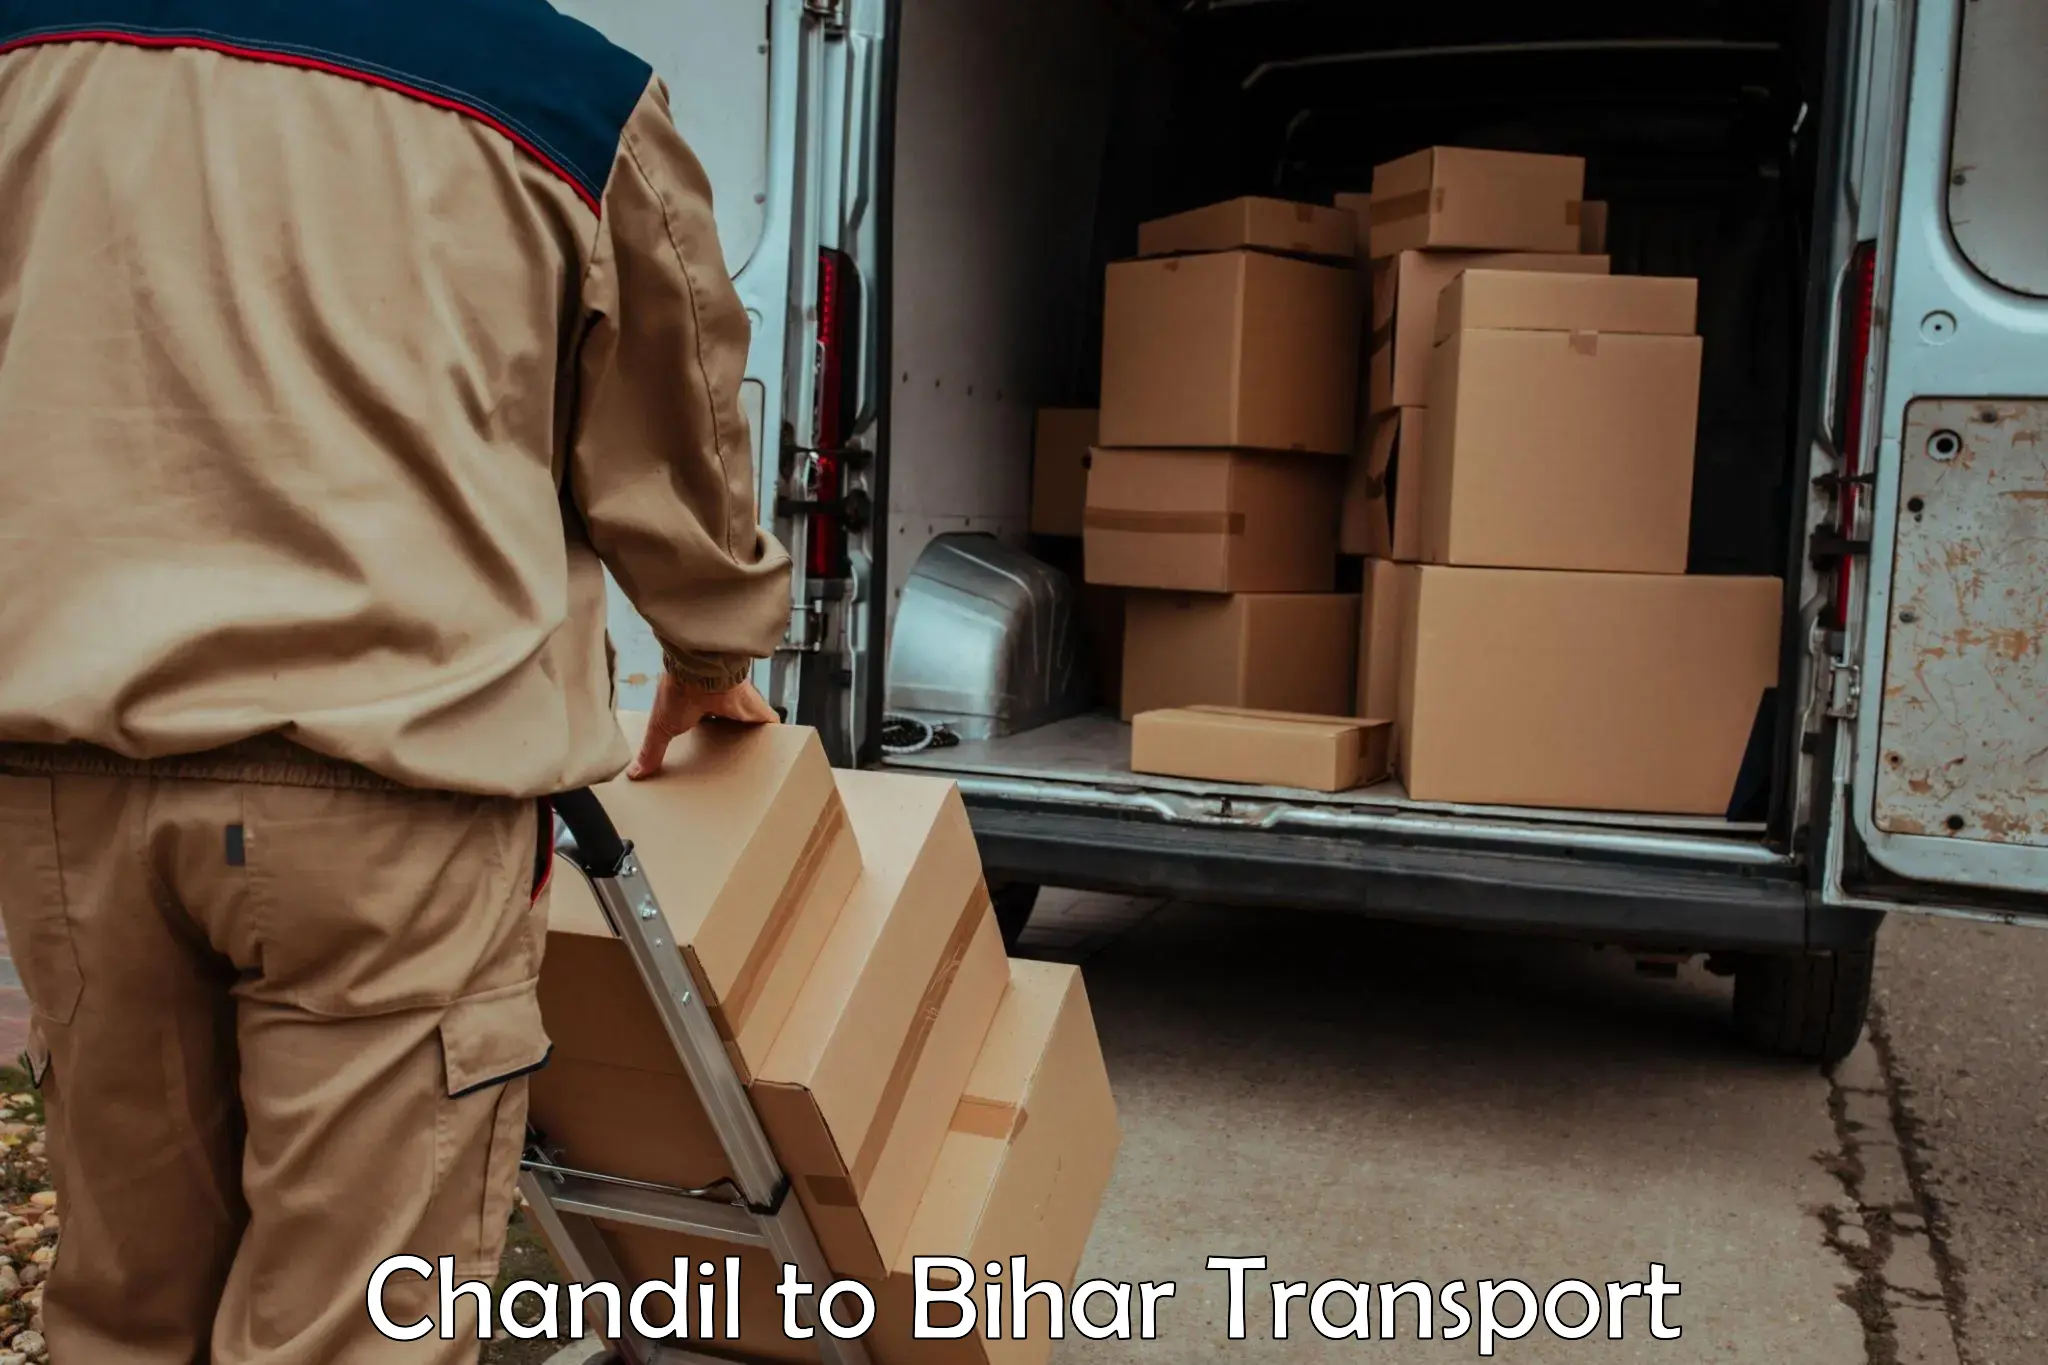 Air freight transport services Chandil to Gaya